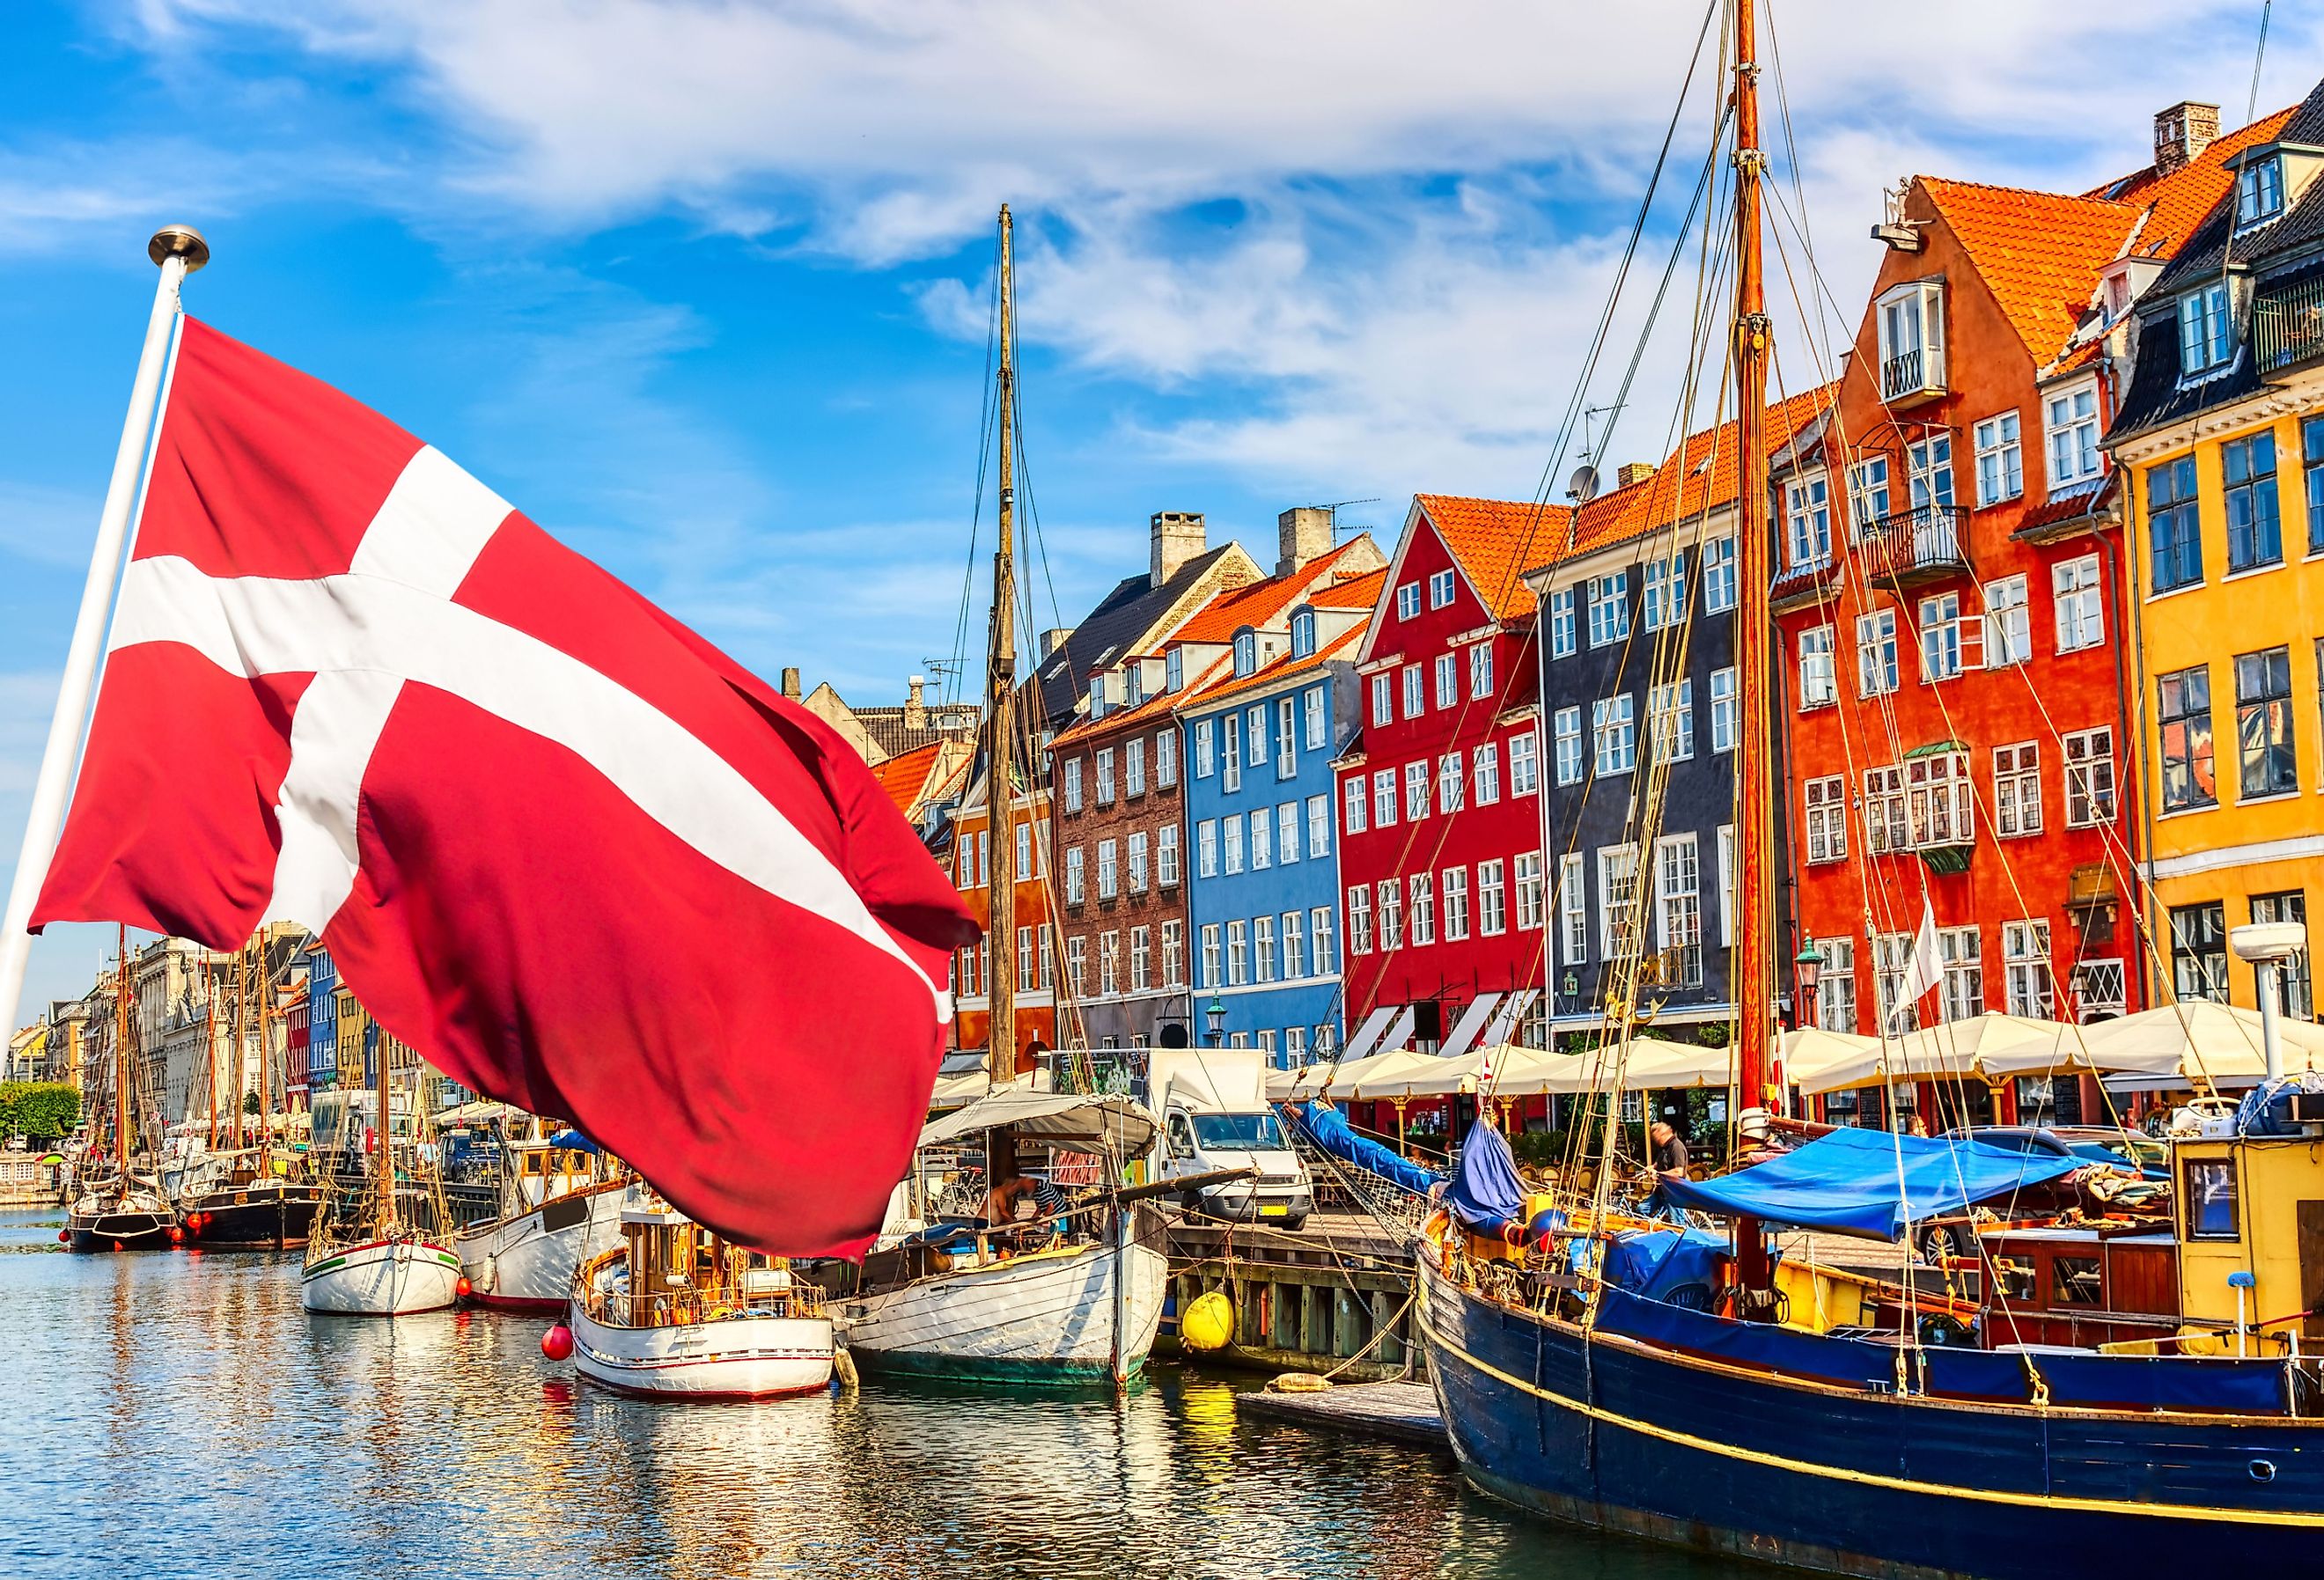 Denmark is one of the best countries to live in the world. Image credit Nick N A via Shutterstock